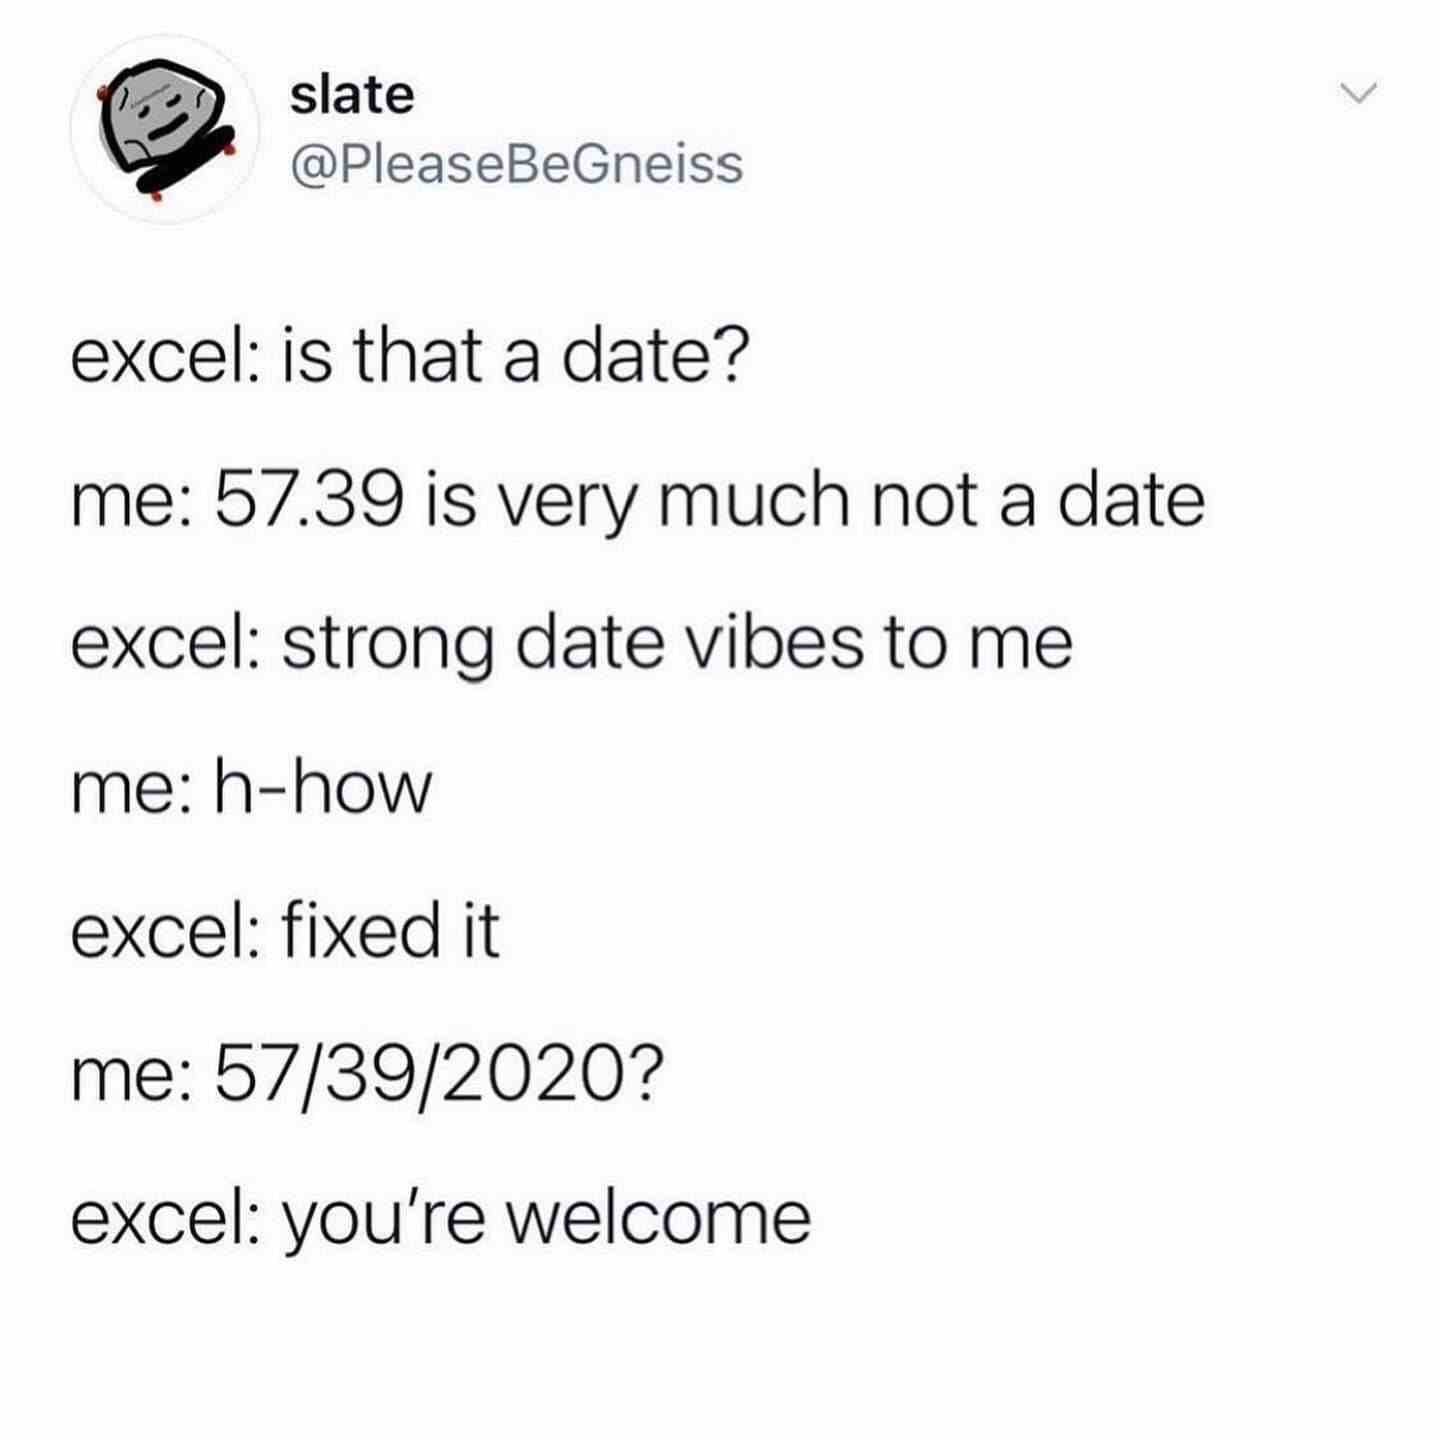 Excel: is that a date?